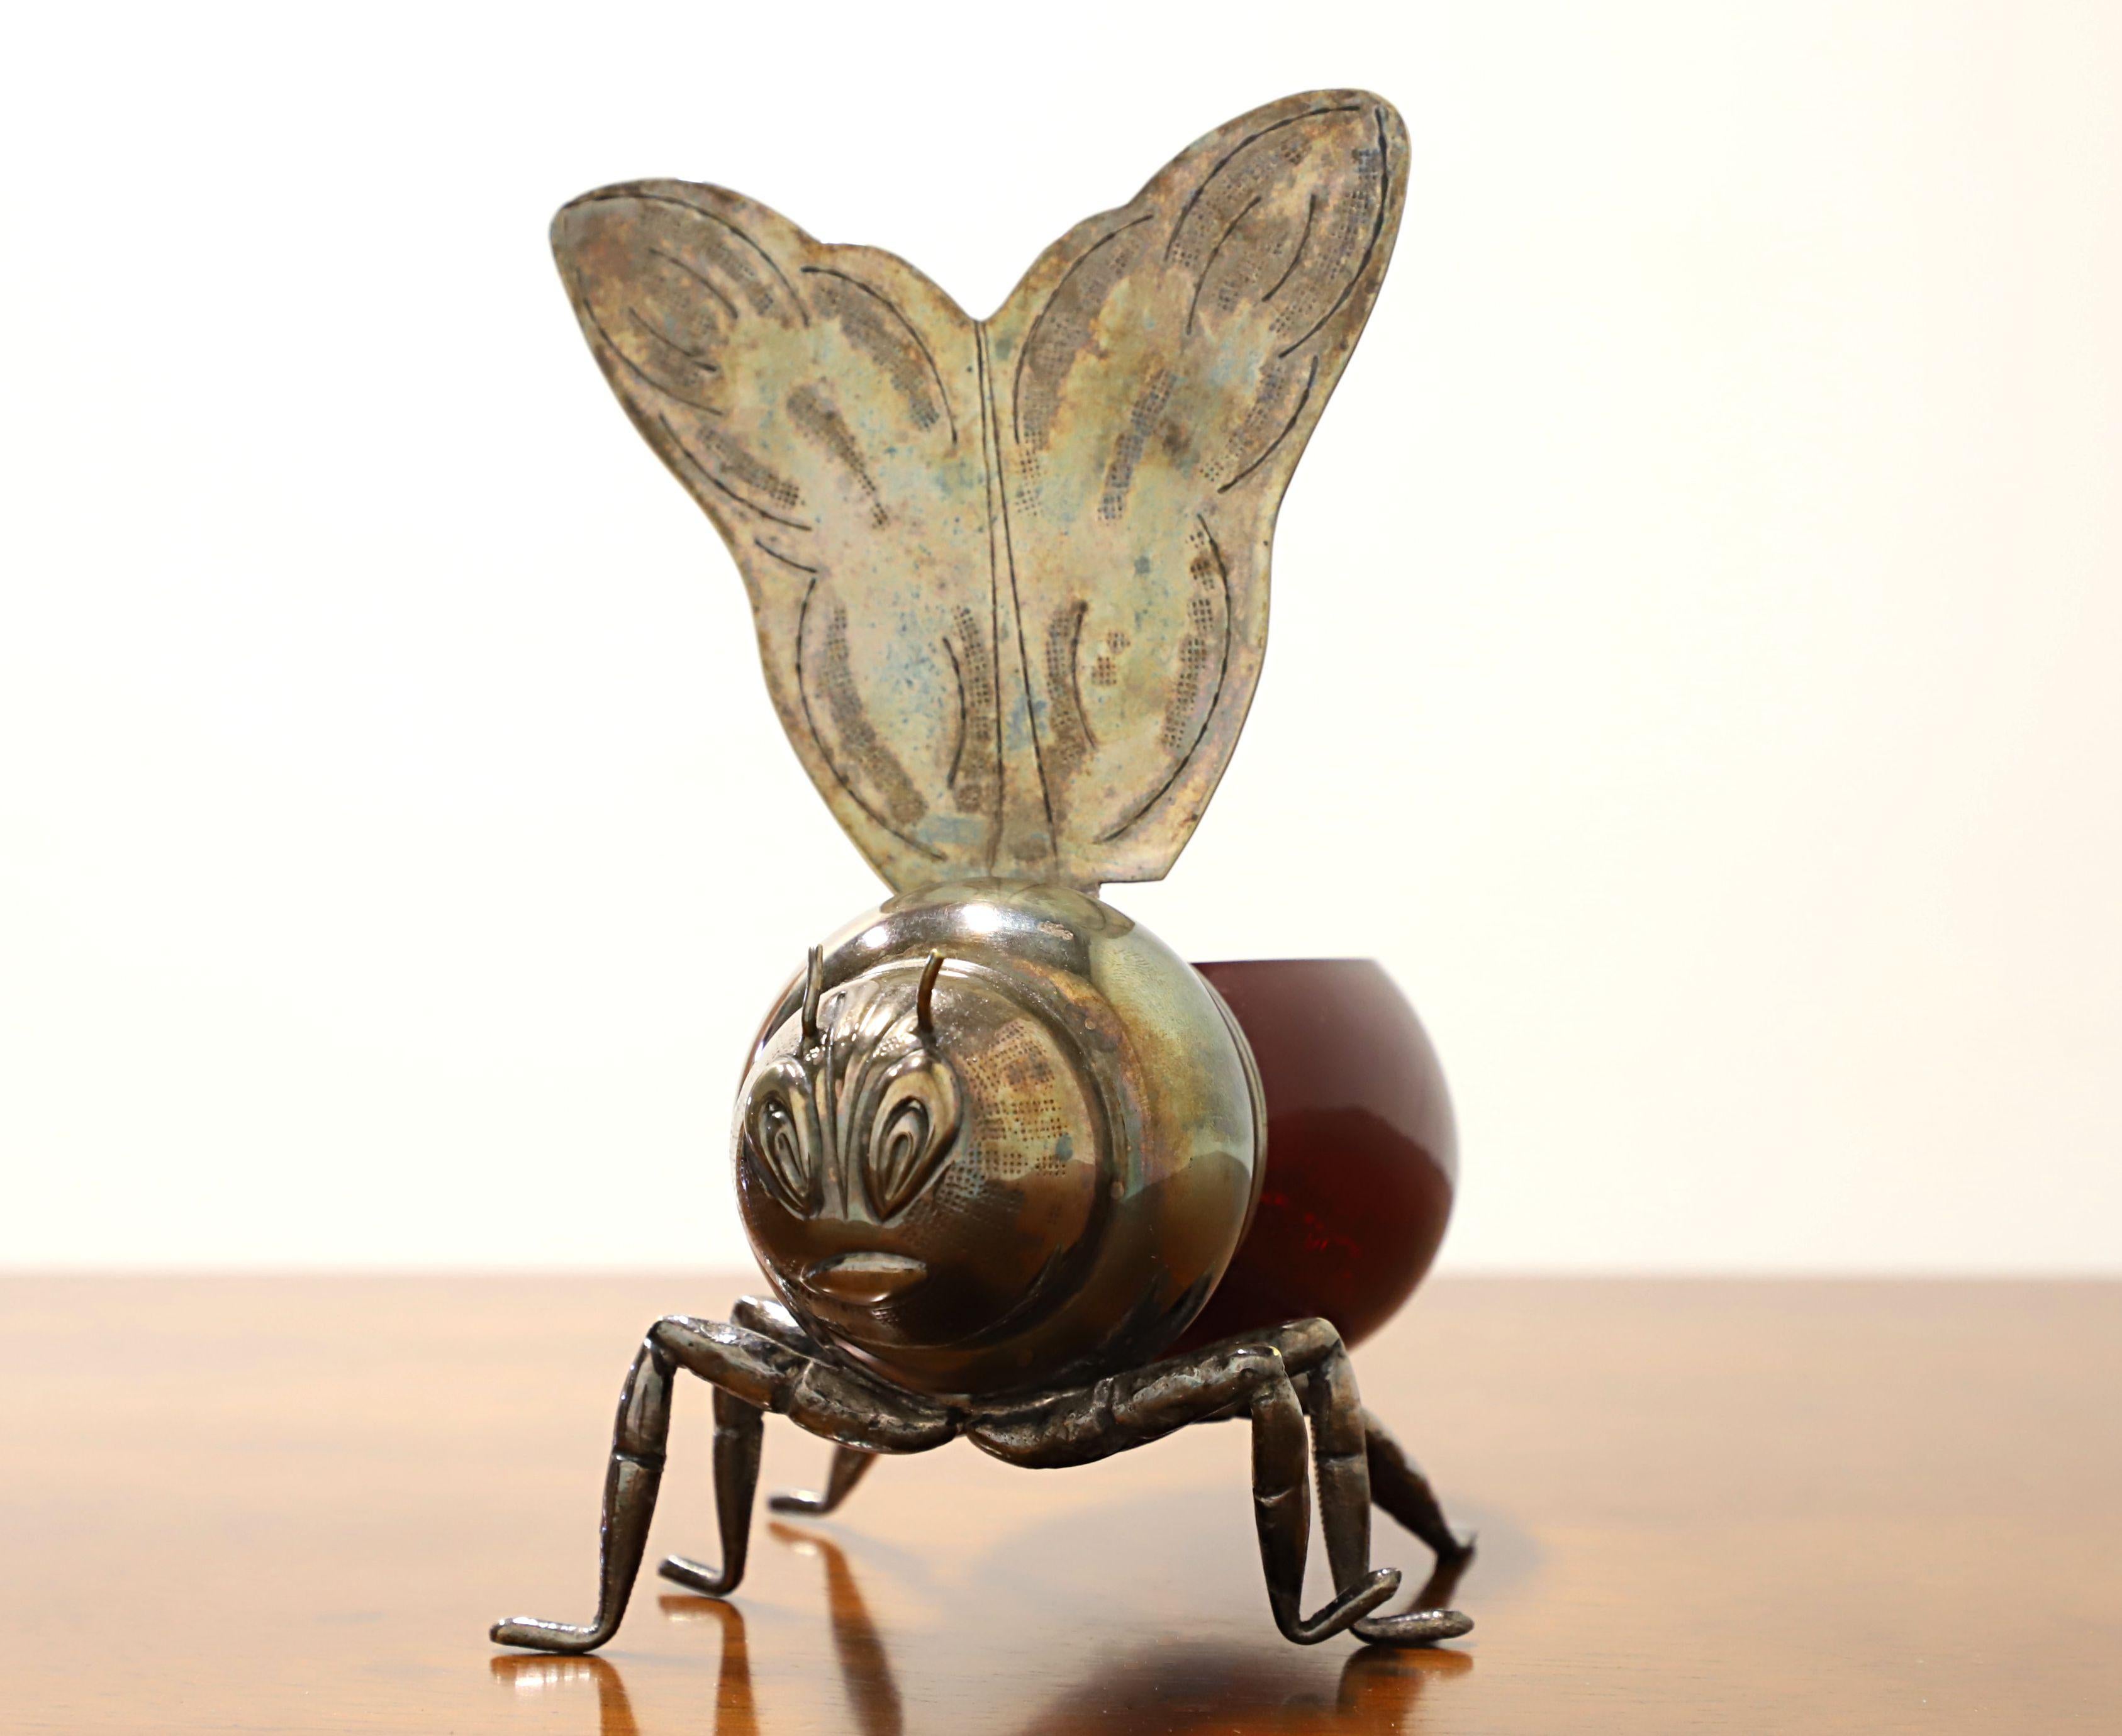 A stylish and cute honey pot by the Florentine silversmiths Teghini Firenze. Shaped like a large honey bee with silver plated head, legs & wings, and the body being made from blown glass in a ruby red shade. Features a hinged lid in the shape of